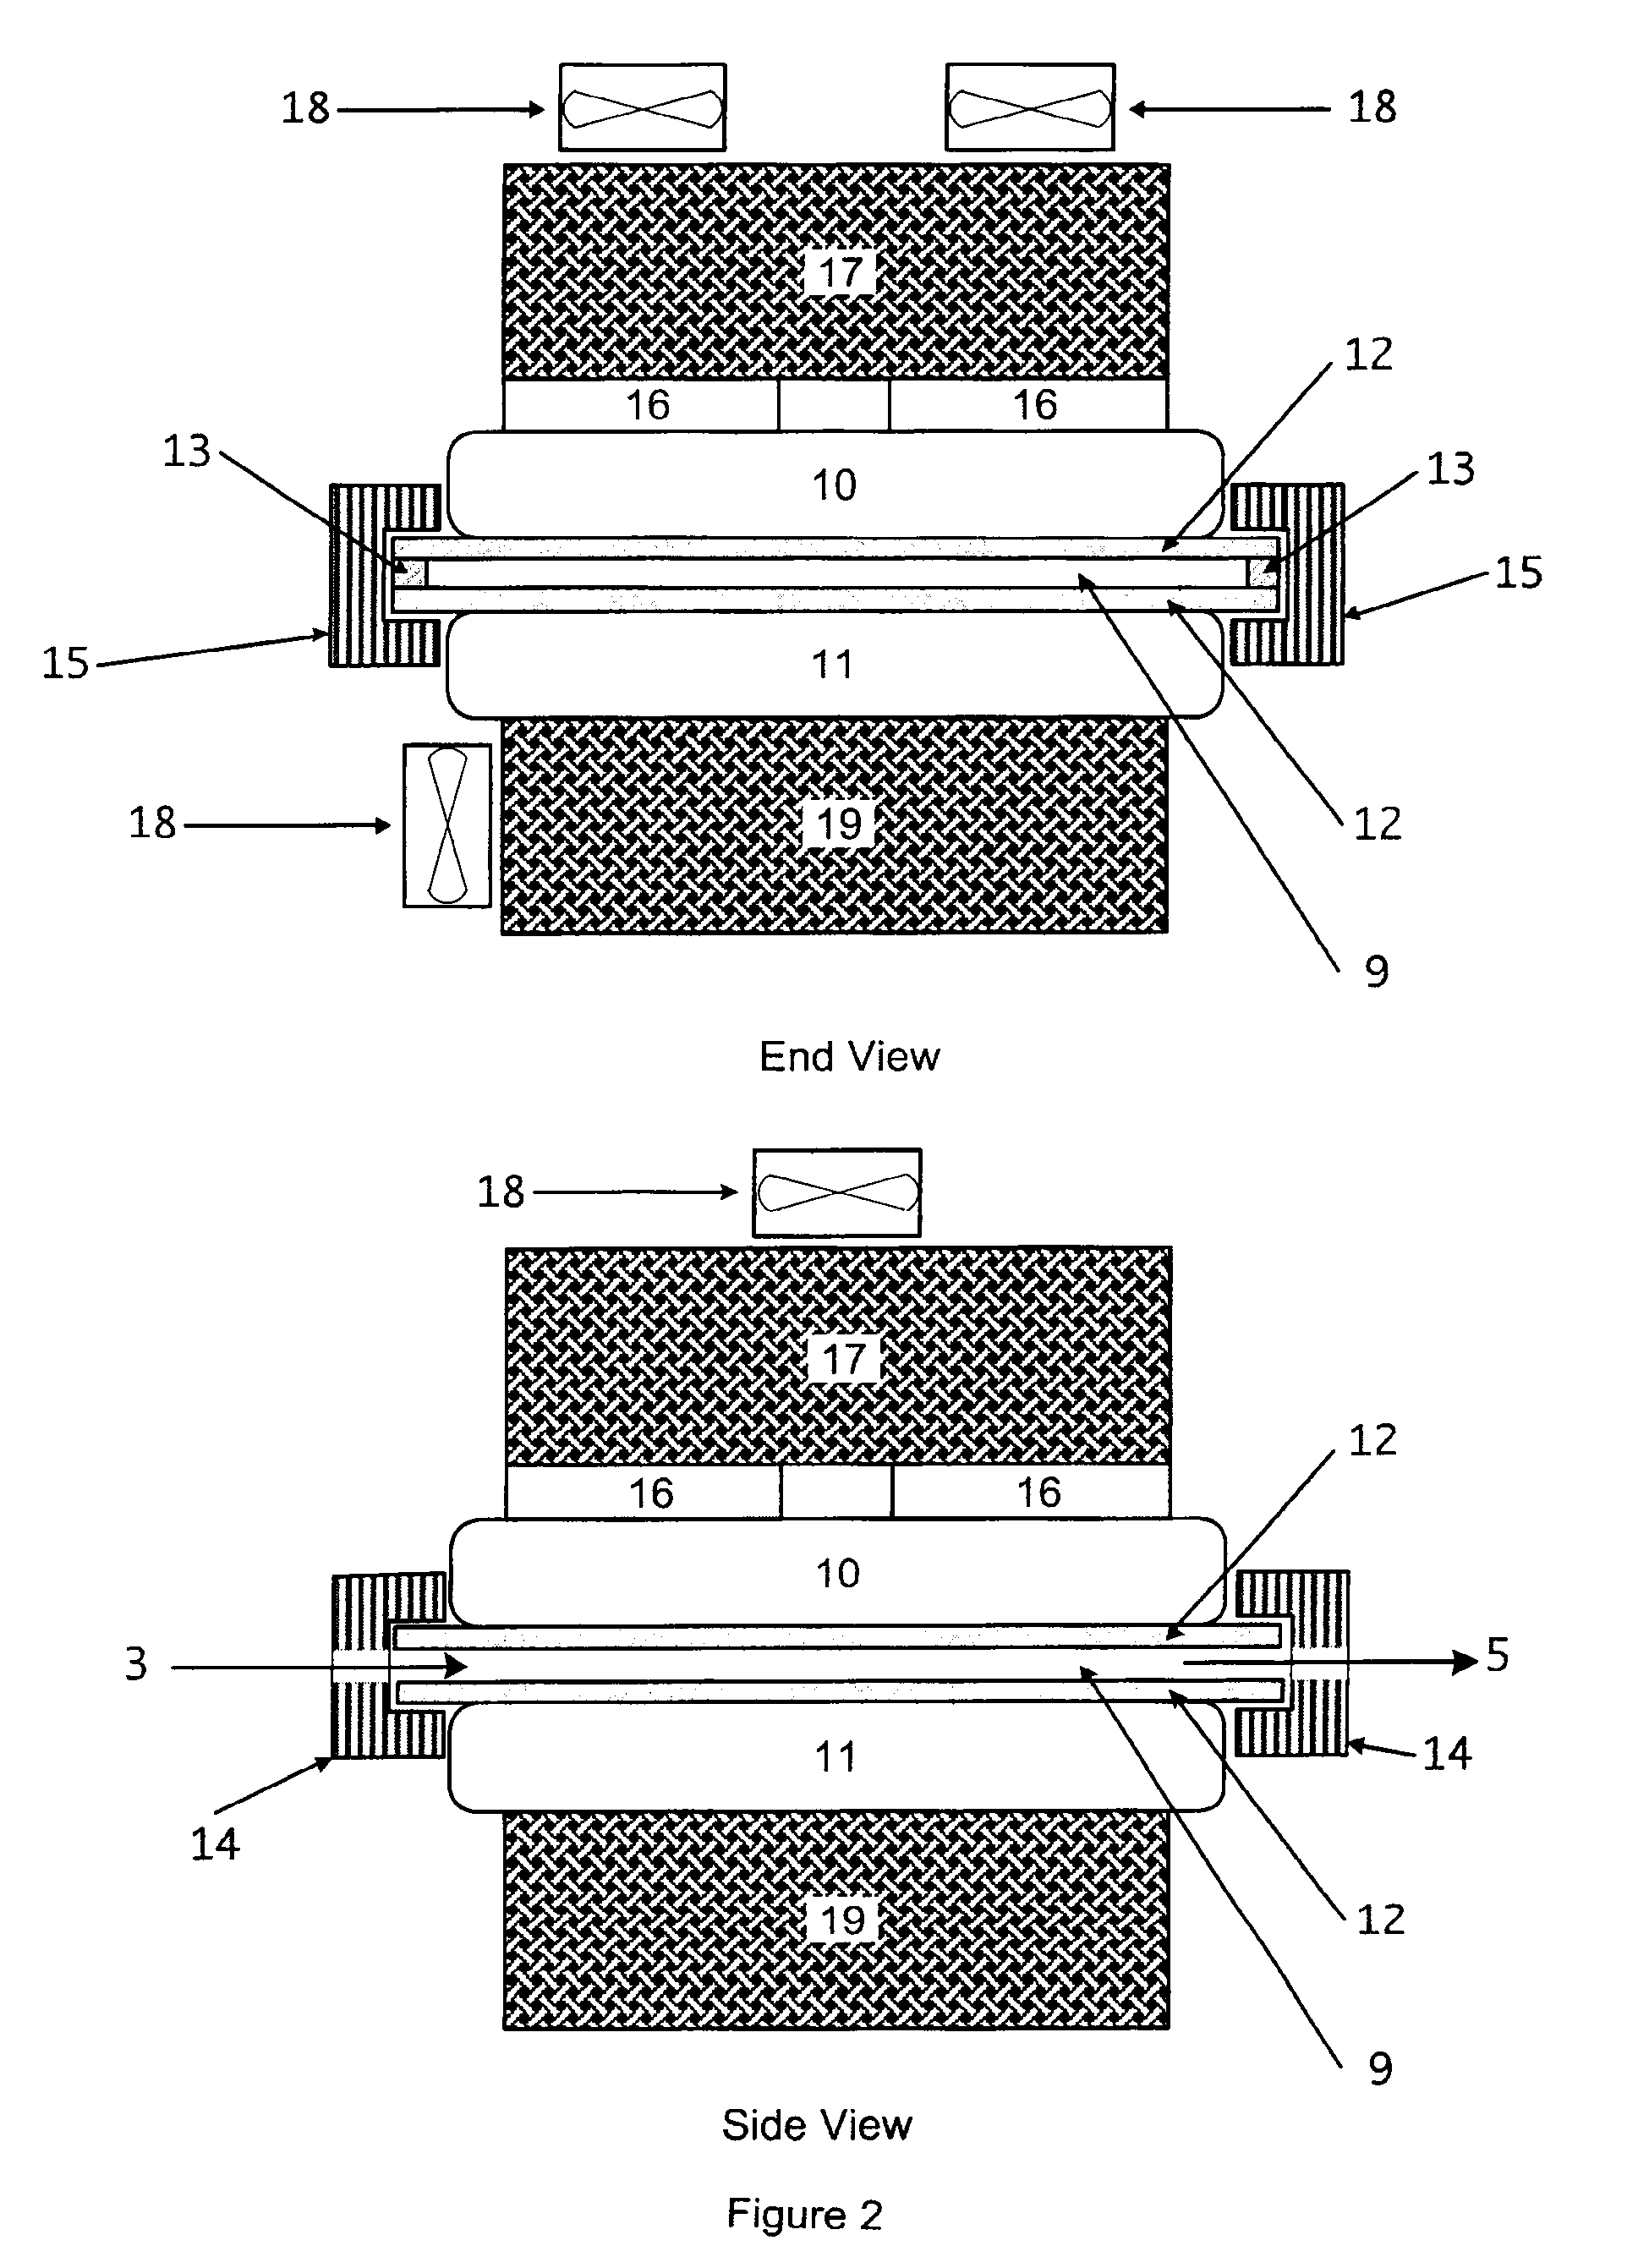 Apparatus for highly efficient cold-plasma ozone production